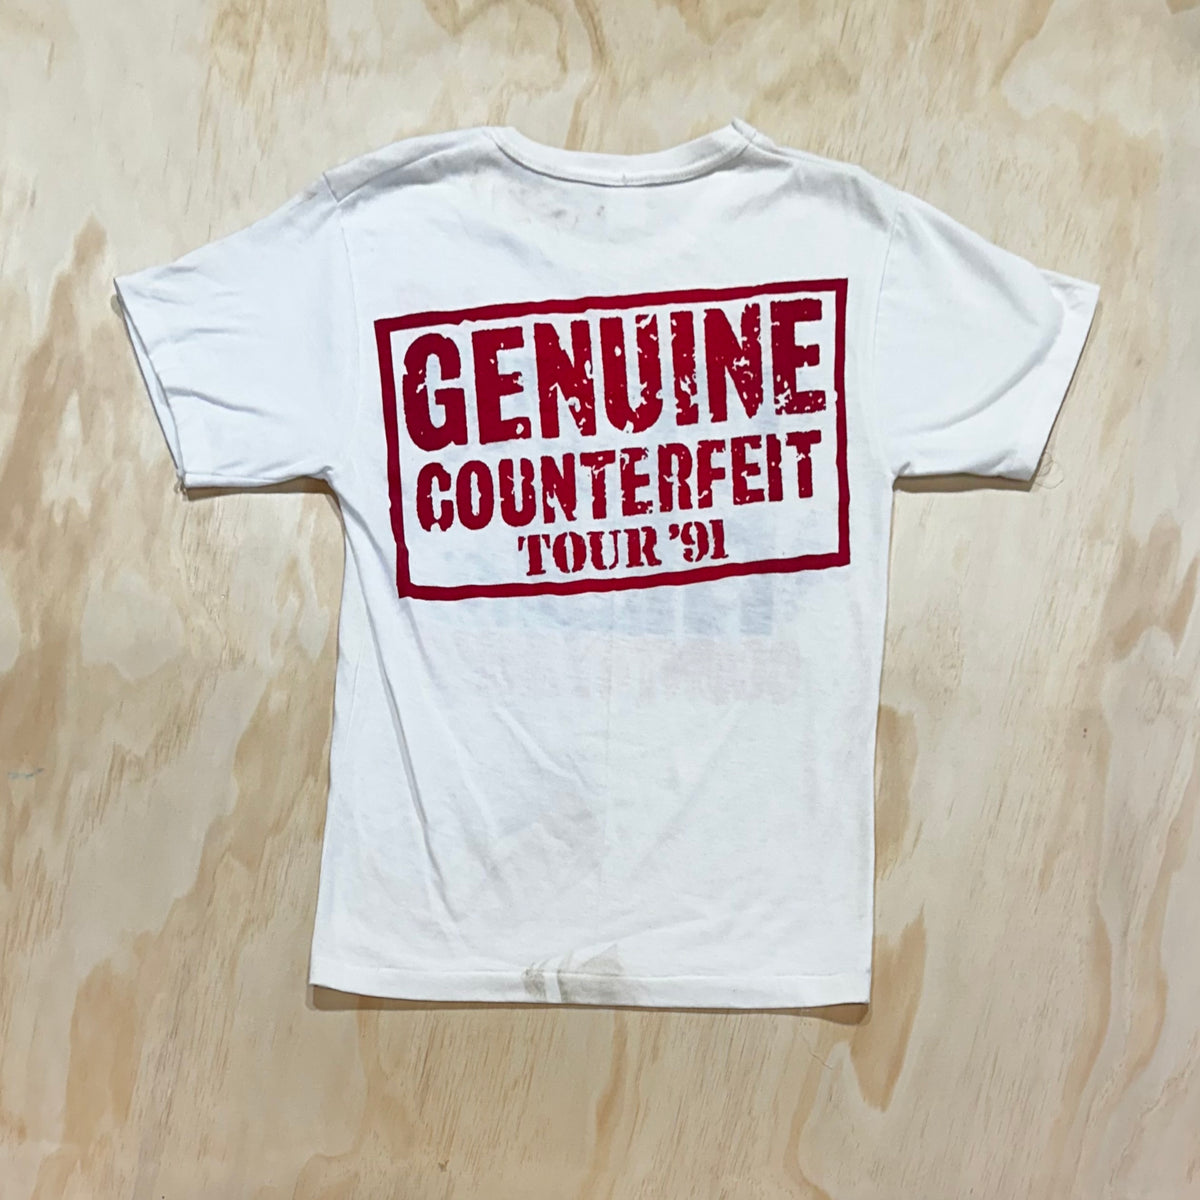 Vintage RARE 90s SIGNED Living Legends of Country music Genuine Counterfeit Tour 1991 T-shirt